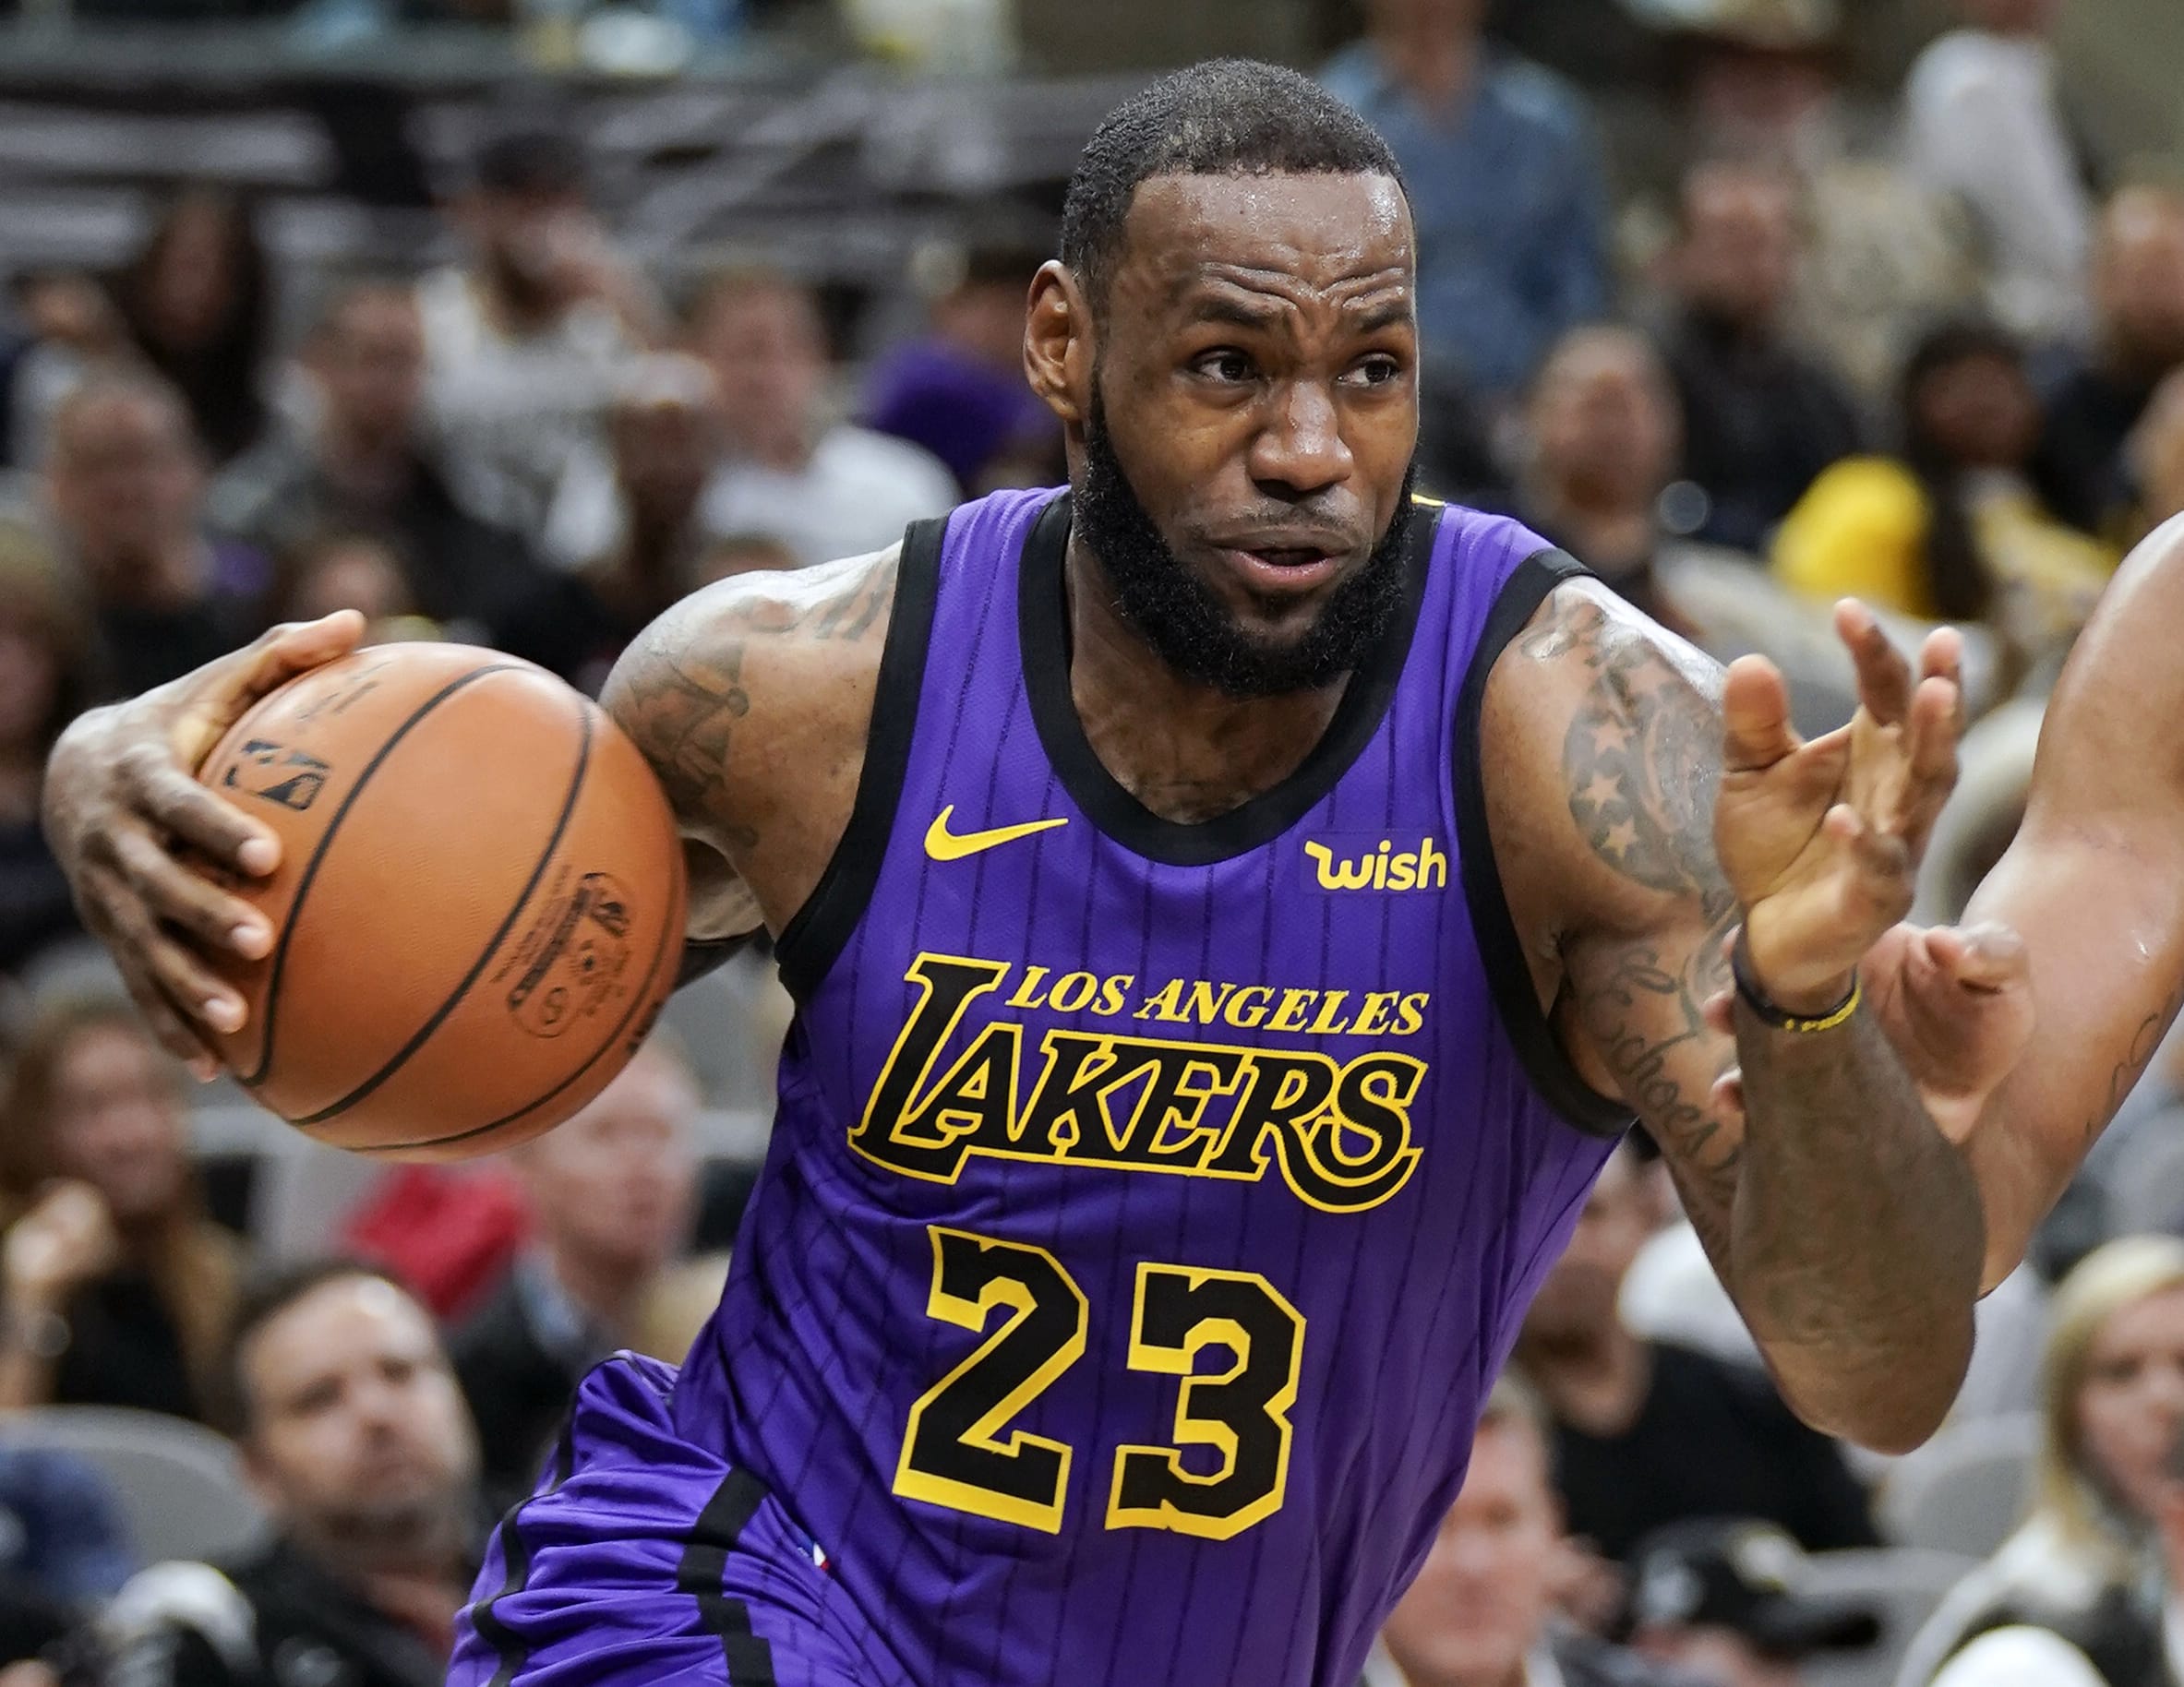 LeBron James was named The Associated Press Male Athlete of the Year on Thursday, Dec. 27, 2018.